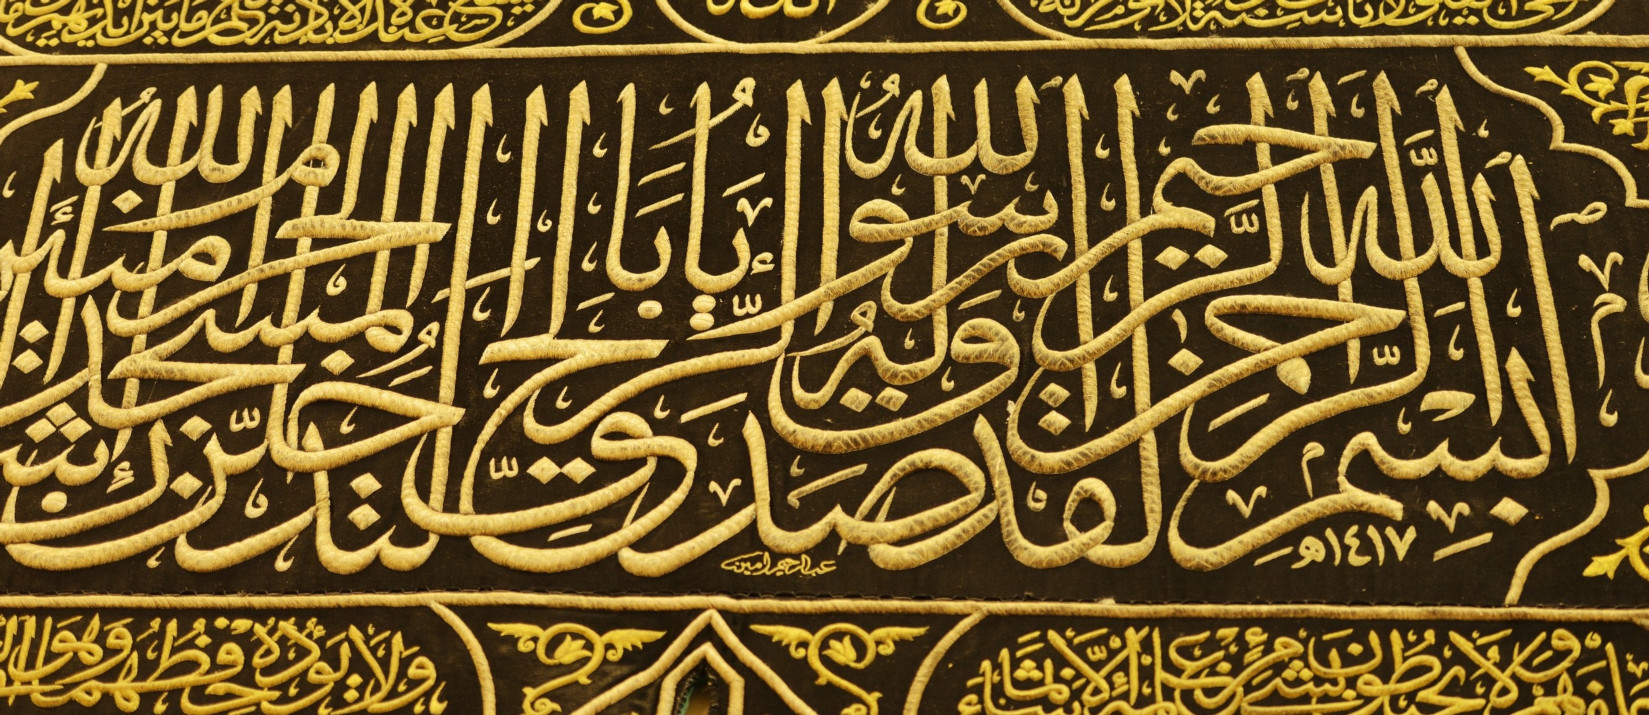 Calligraphy embroidered in gold on the shroud of Kaaba